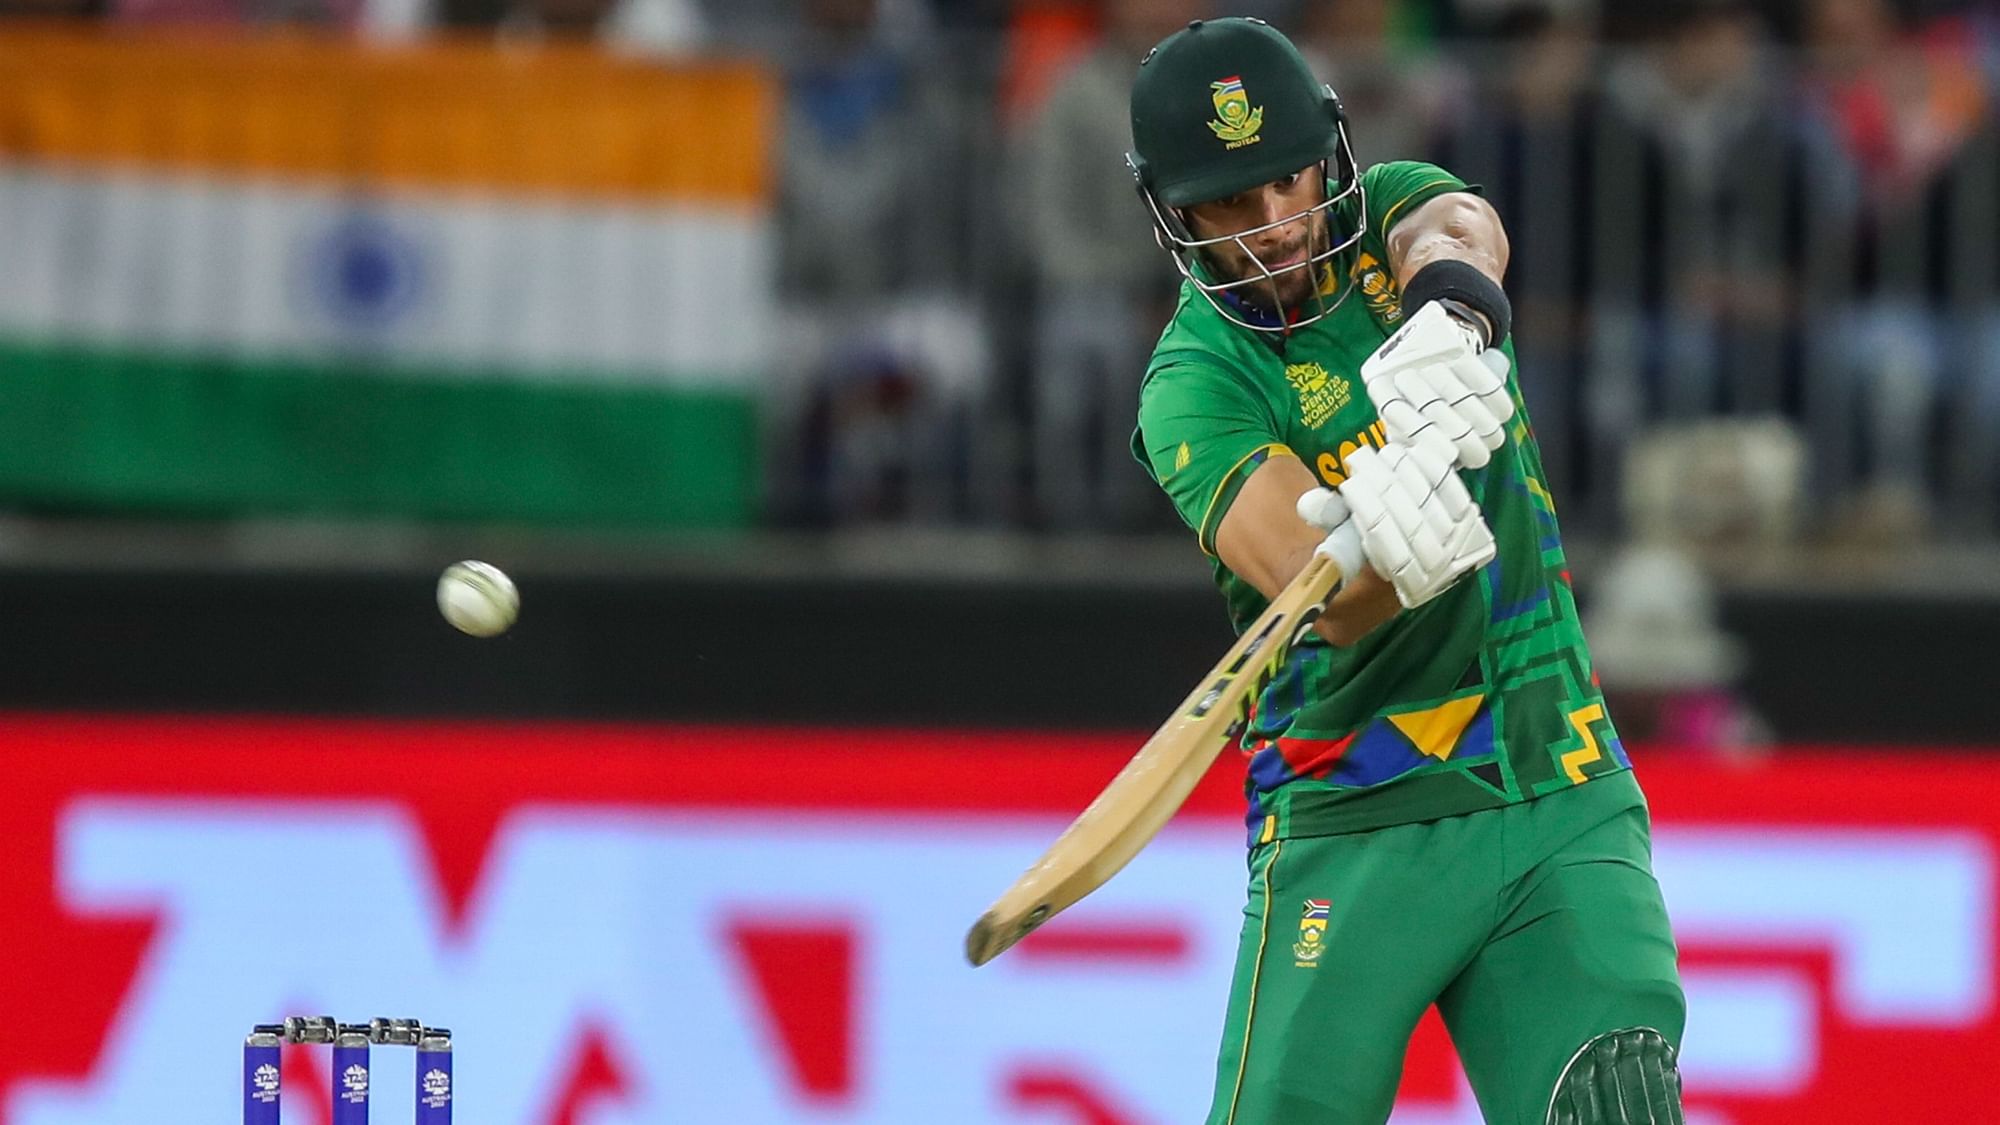 India vs South Africa Live Score, IND vs SA Live Cricket Score, T20 World Cup Match Latest Updates South Africa Beat India by 5 Wickets